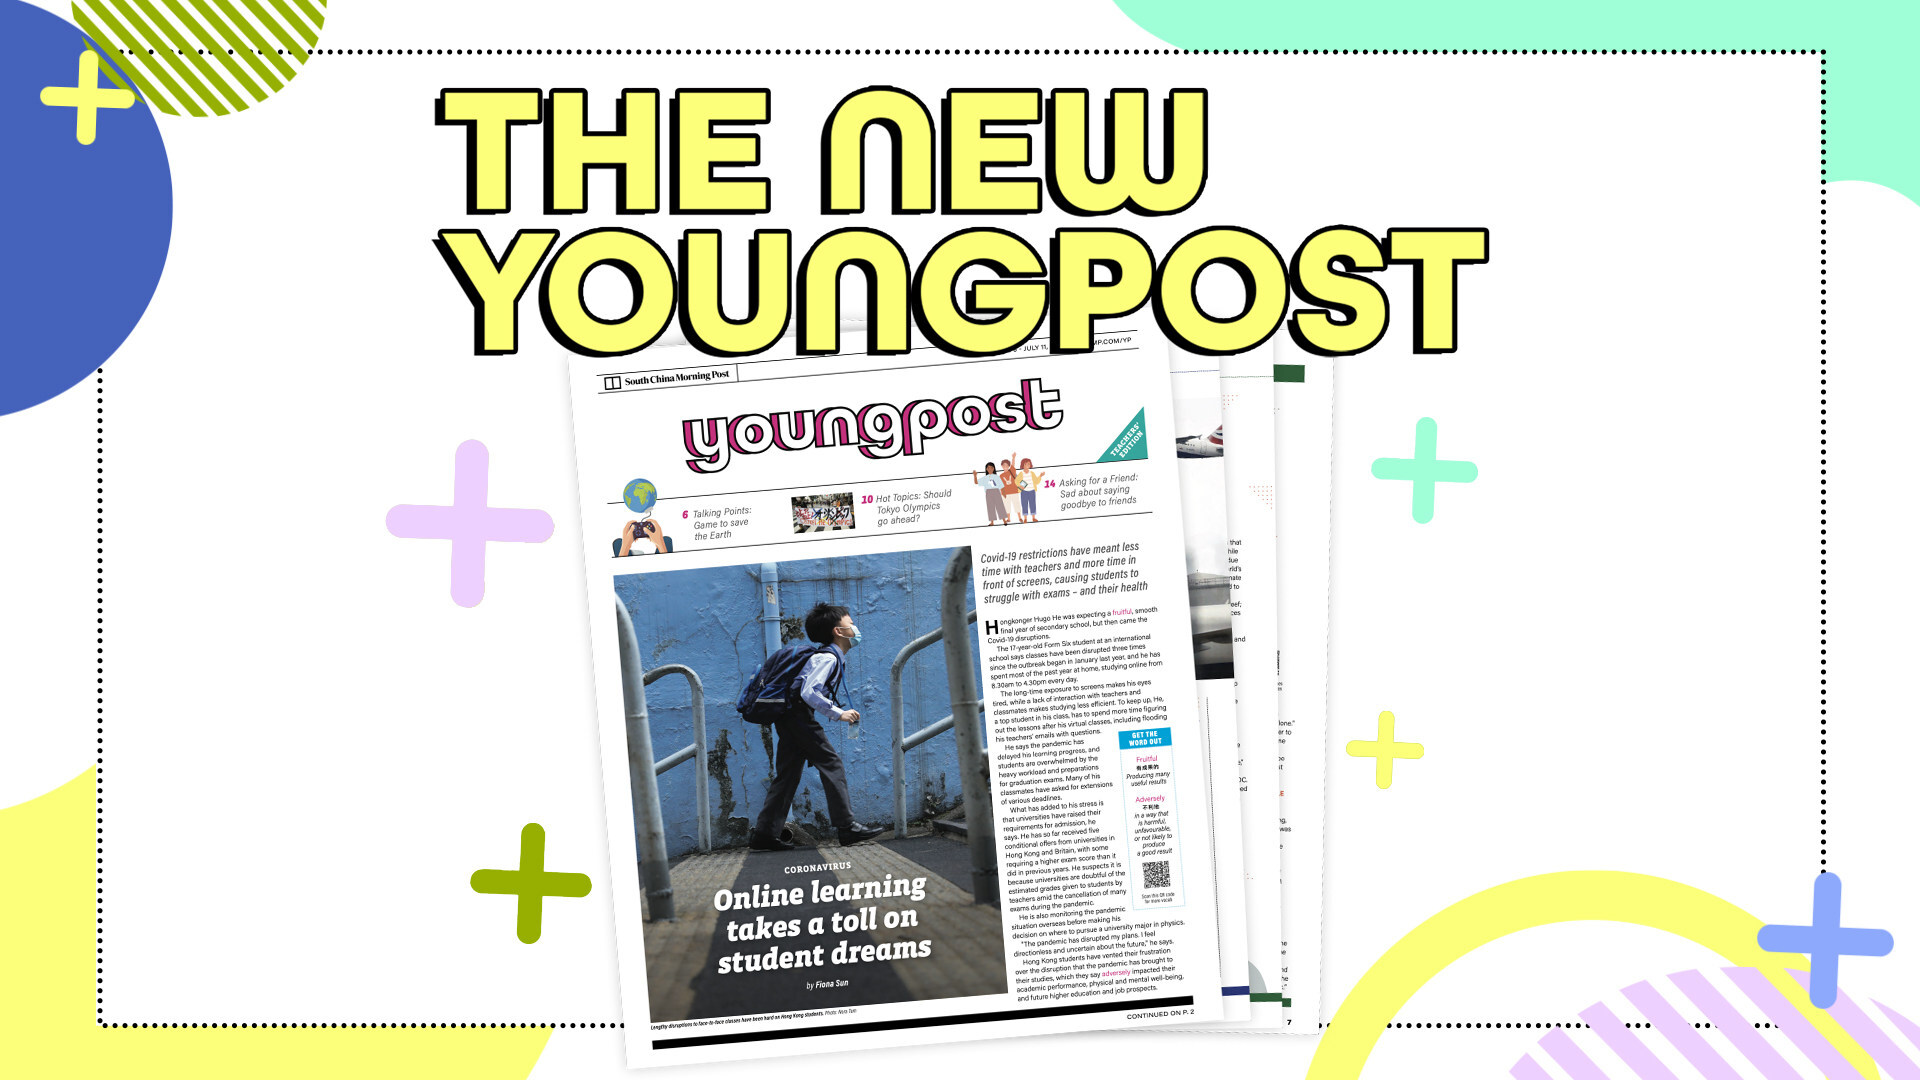 Young Post is getting a makeover starting in September 2021.